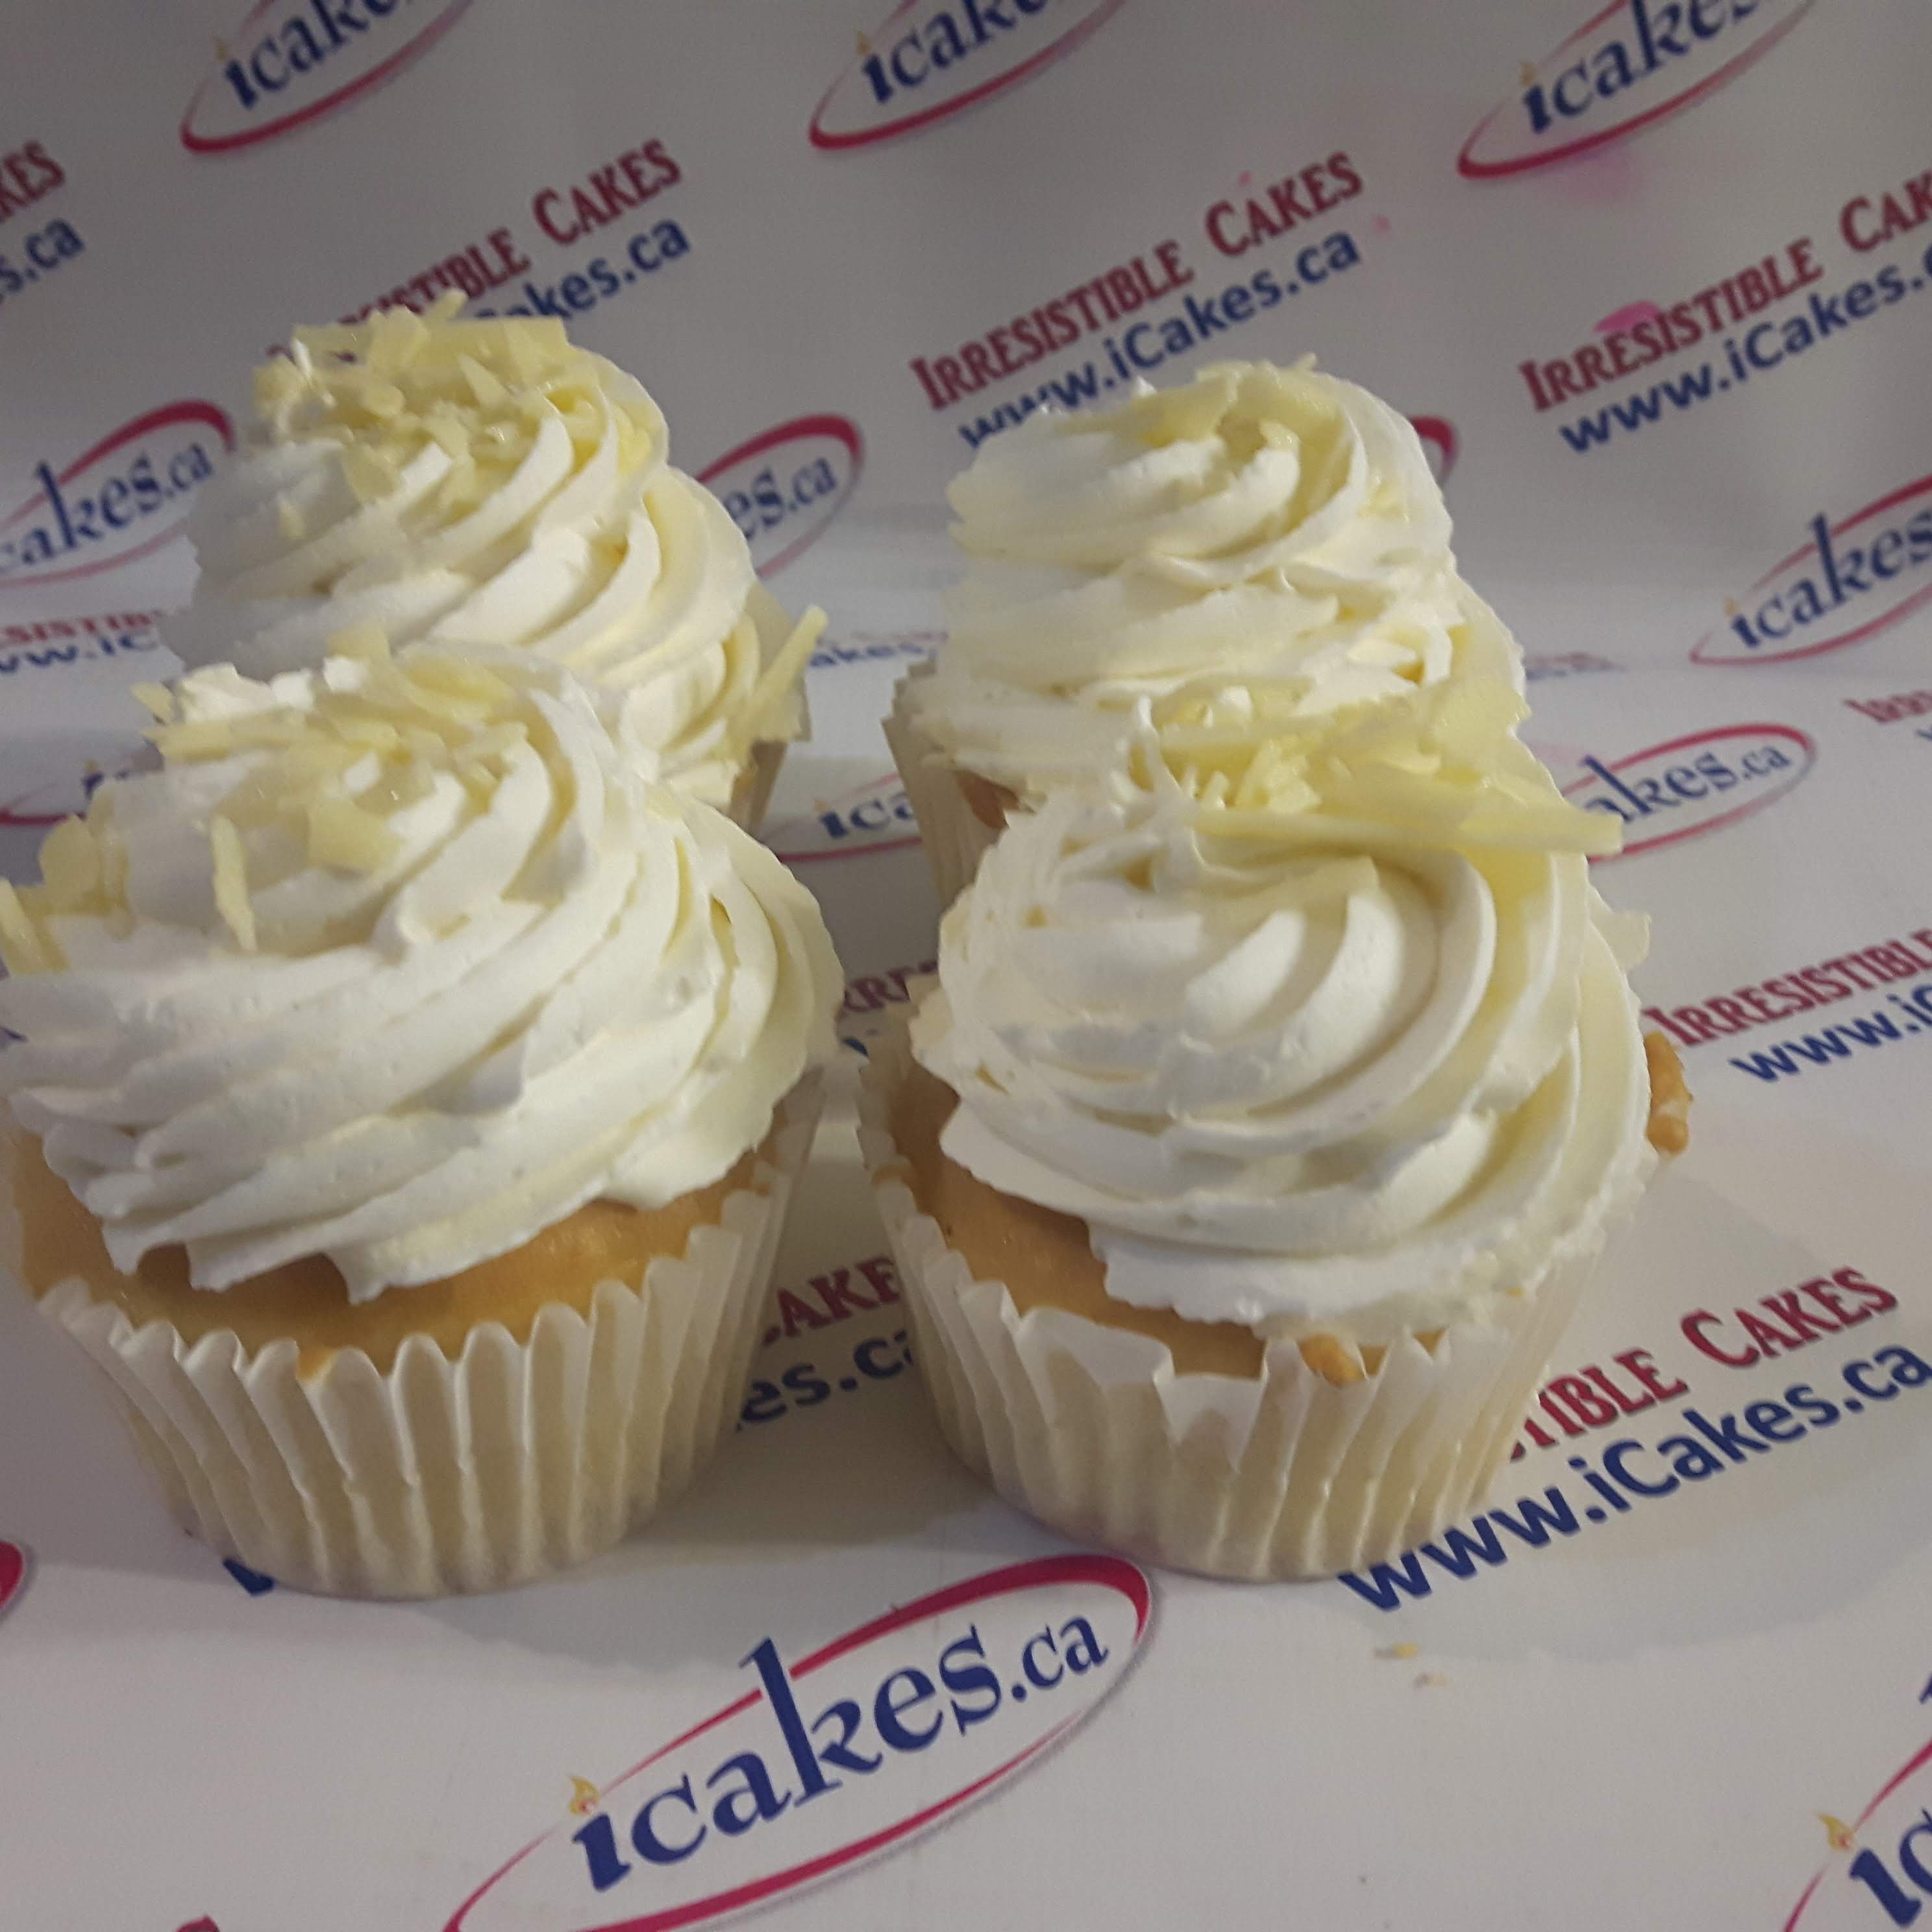 Vanilla cupcakes from Irresistible Cakes Scarborough